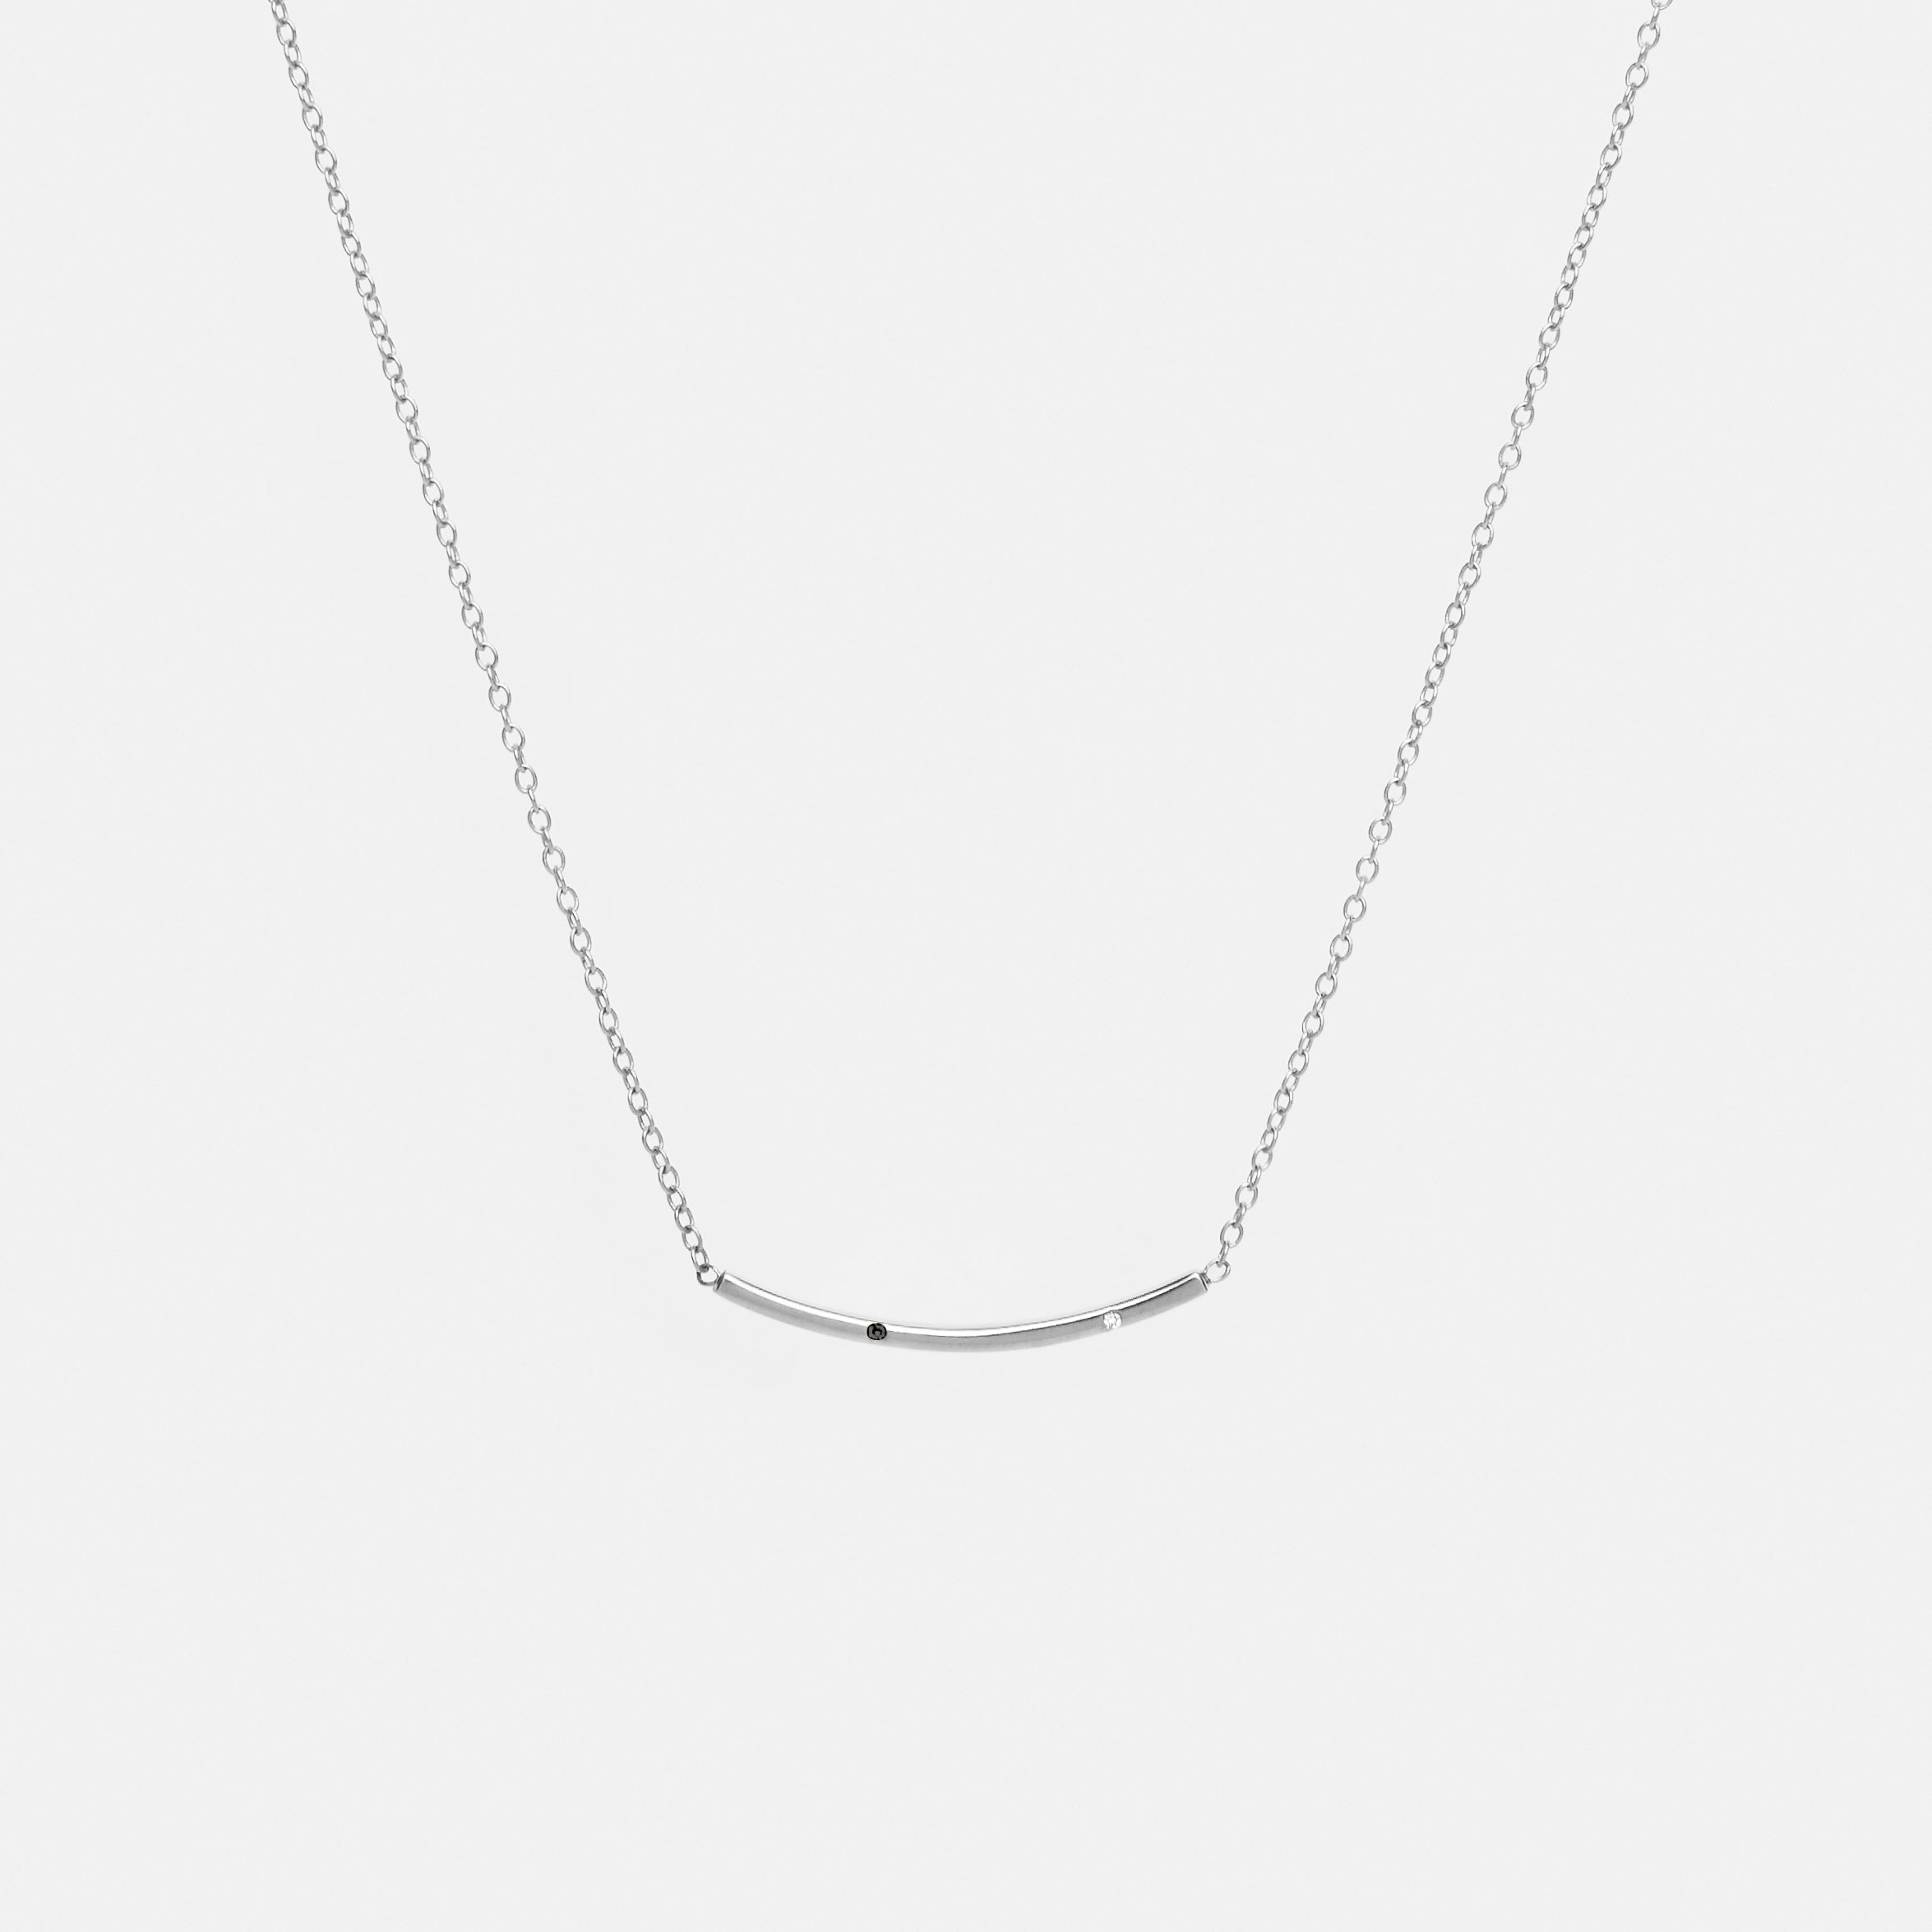 Sara Thin Necklace in 14k Gold set with White and Black Diamonds By SHW Fine Jewelry NYC